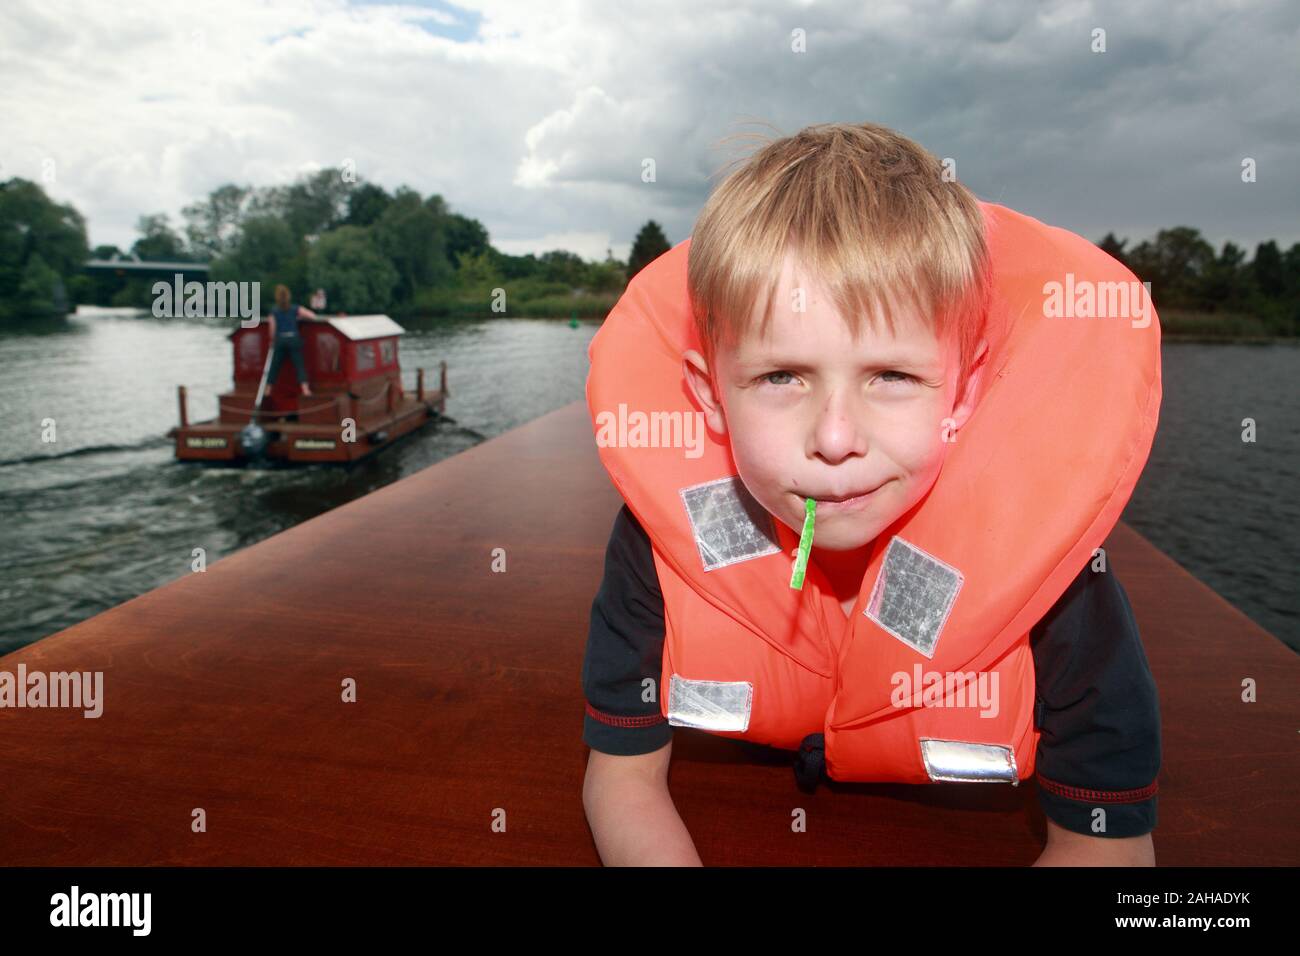 20.06.2010, Berlin, Berlin, Germany - Boy with life jacket looks cheekily at the viewer. 00S100620D005CAROEX.JPG [MODEL RELEASE: YES, PROPERTY RELEASE Stock Photo